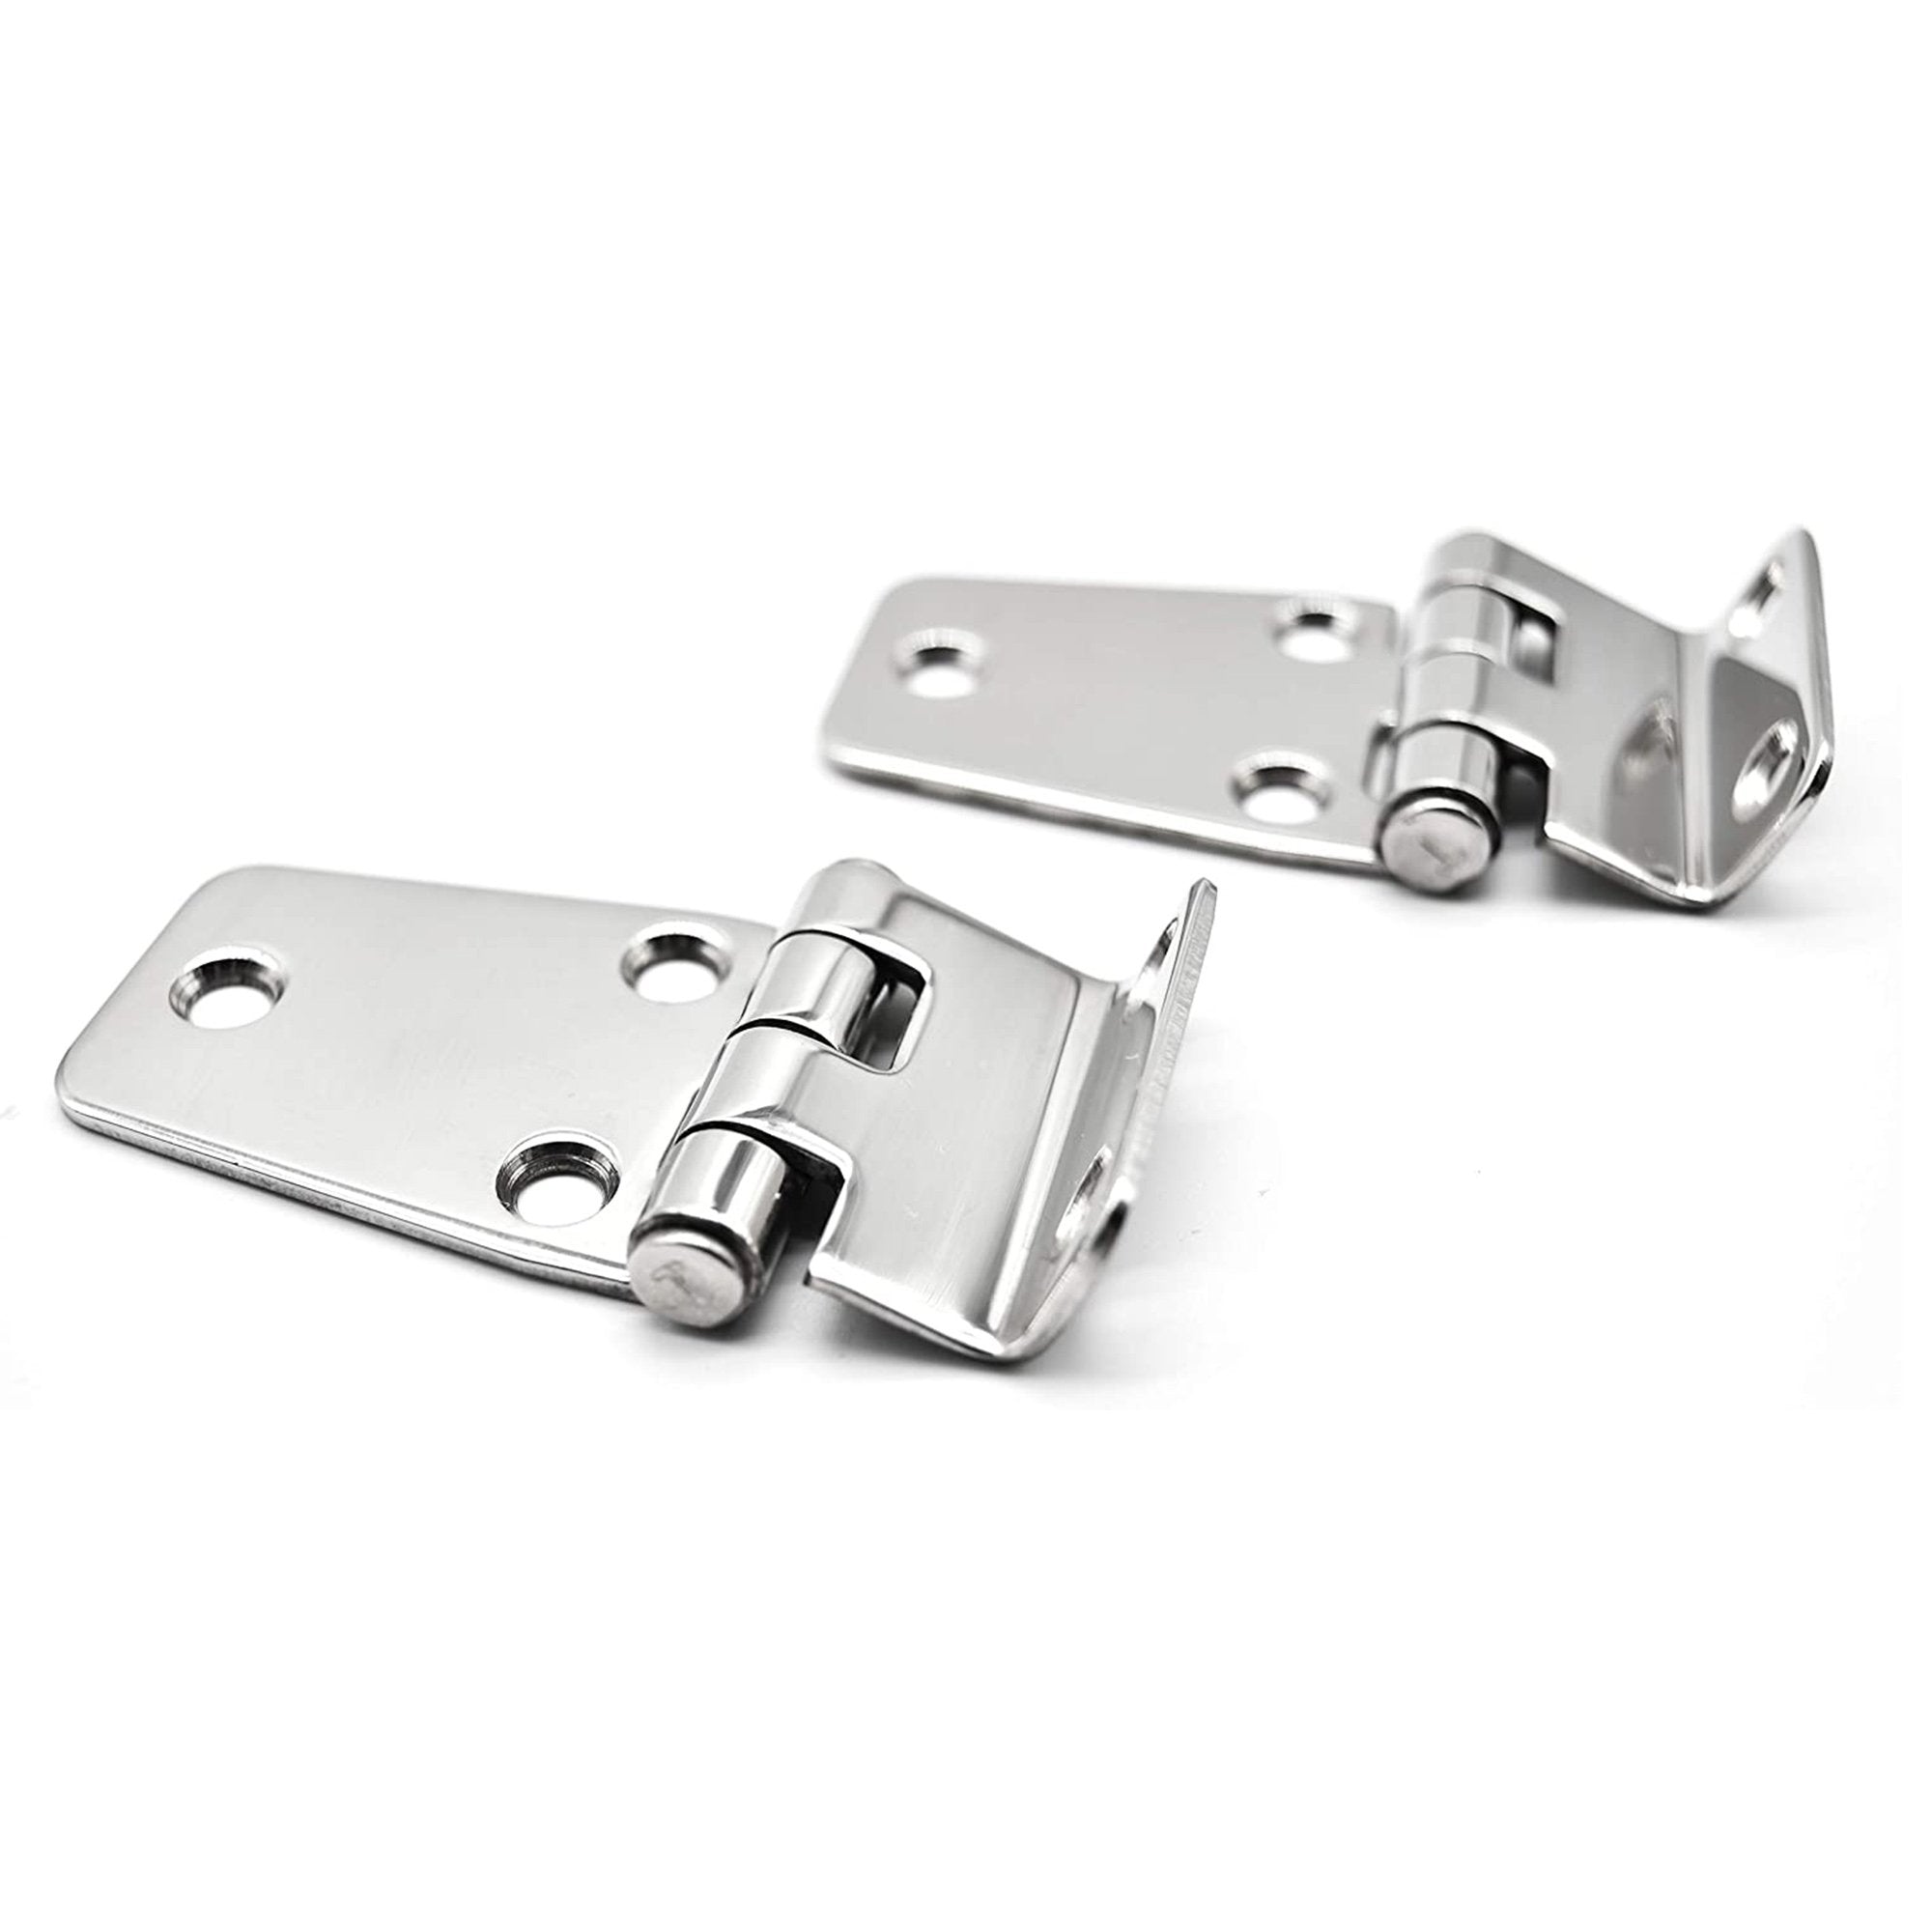 Marine City Stainless Steel Offset Short Side 2-5/8" x 1-7/16" Hinges for Marine Yacht (2 Per Pack)